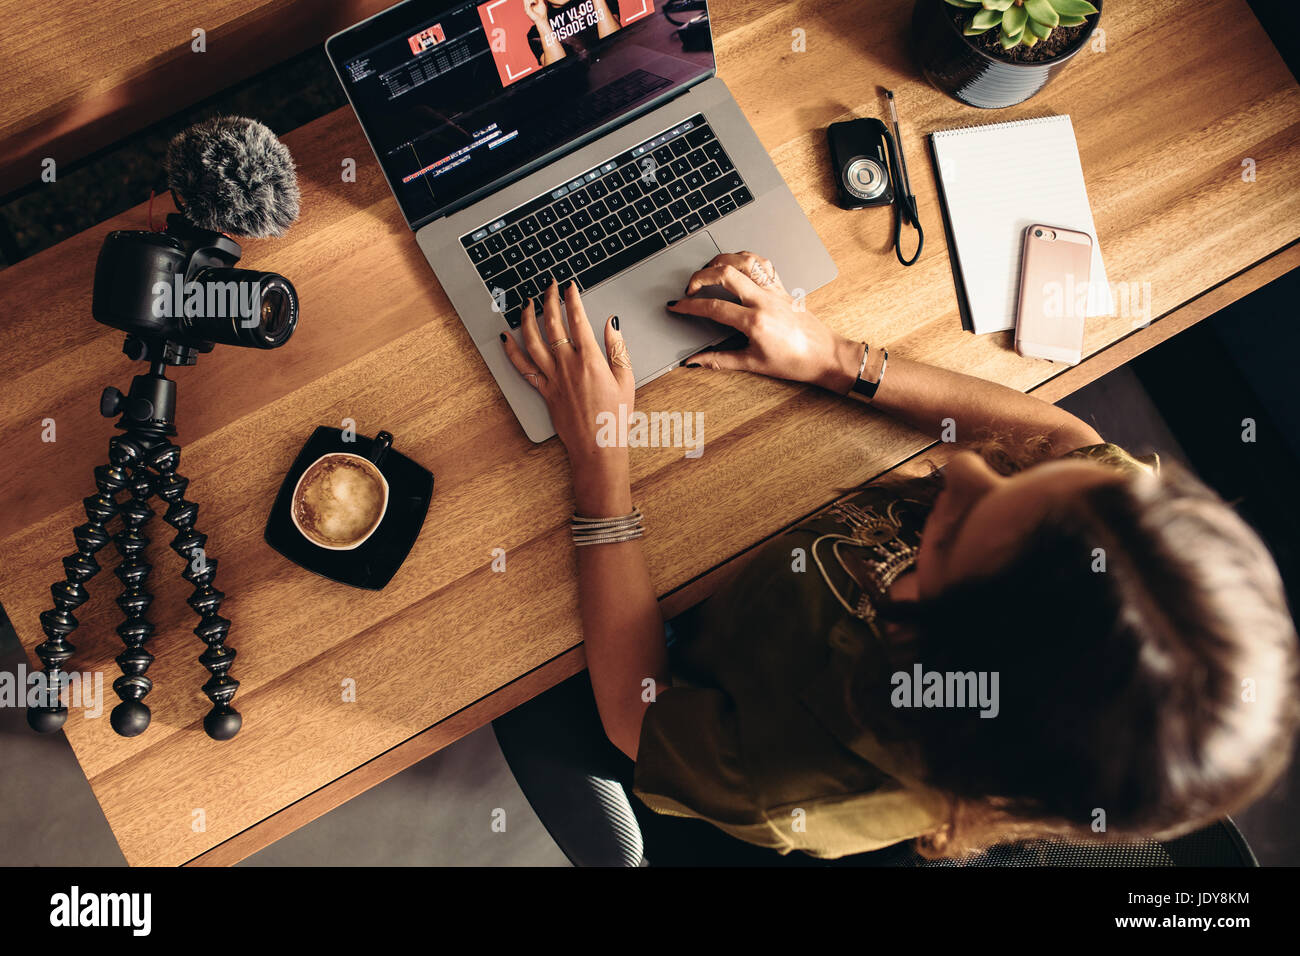 Top view of female vlogger editing video on laptop. Young woman working on computer with coffee and cameras on table. Stock Photo